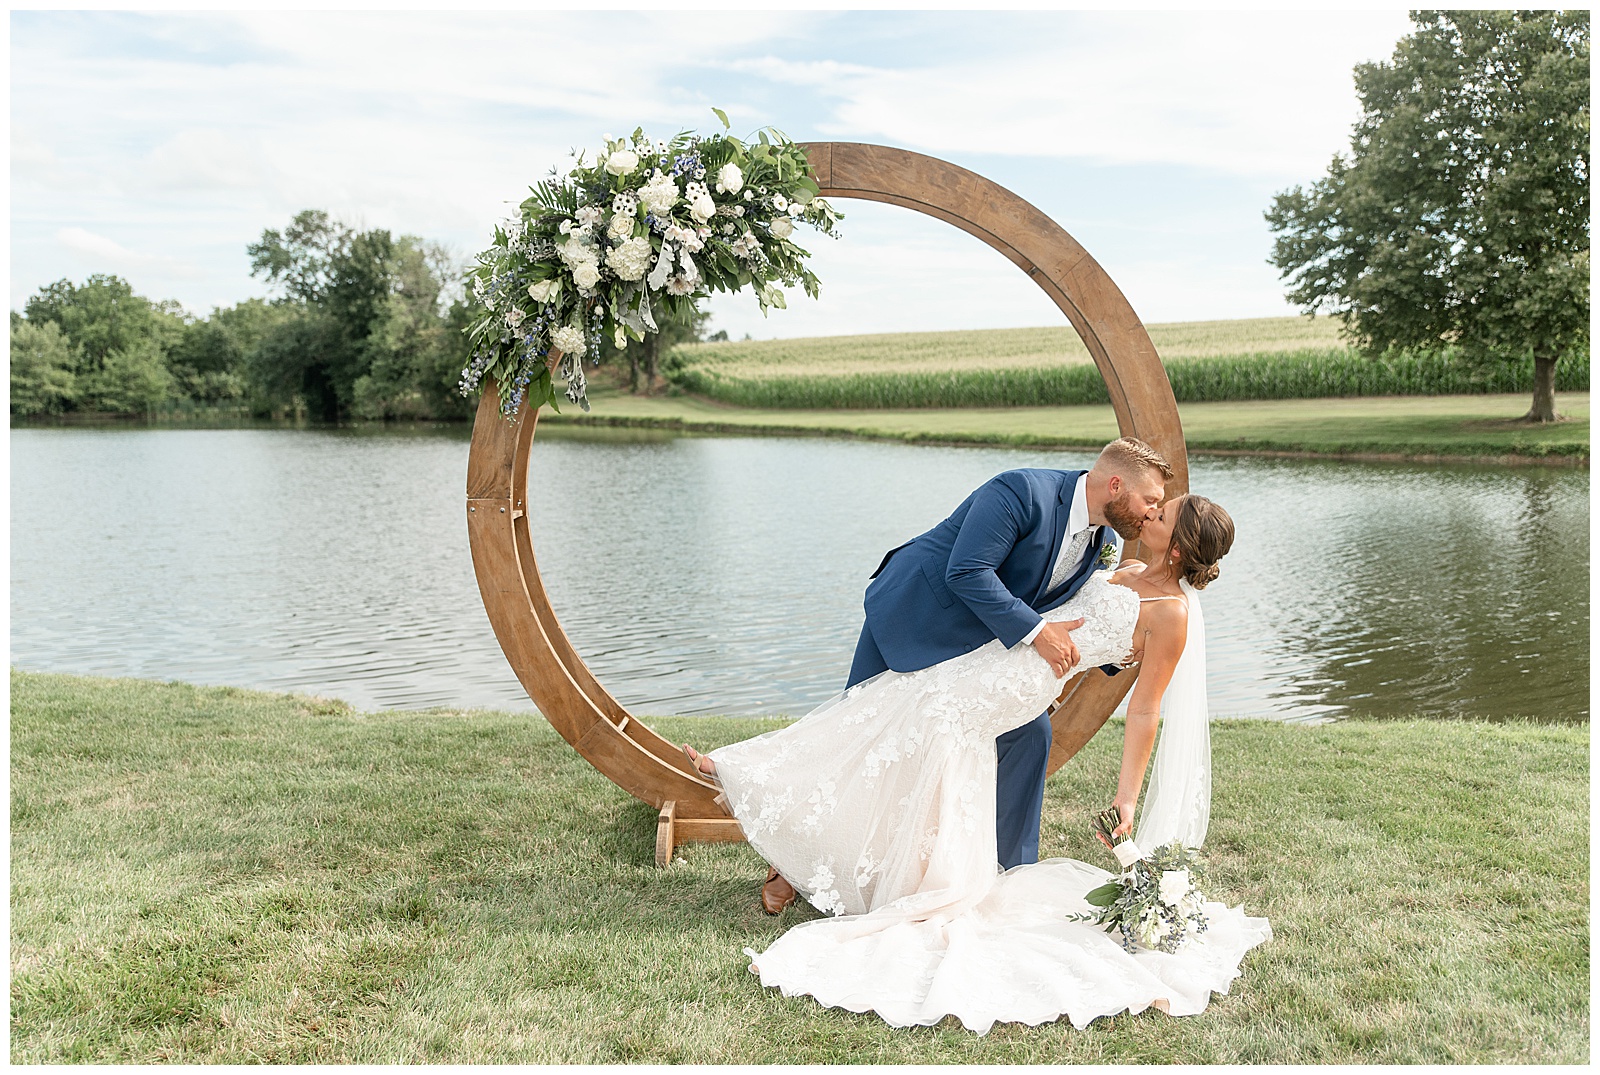 groom dipping his bride back as they kiss by wooden and floral structure by pond at lakefield weddings